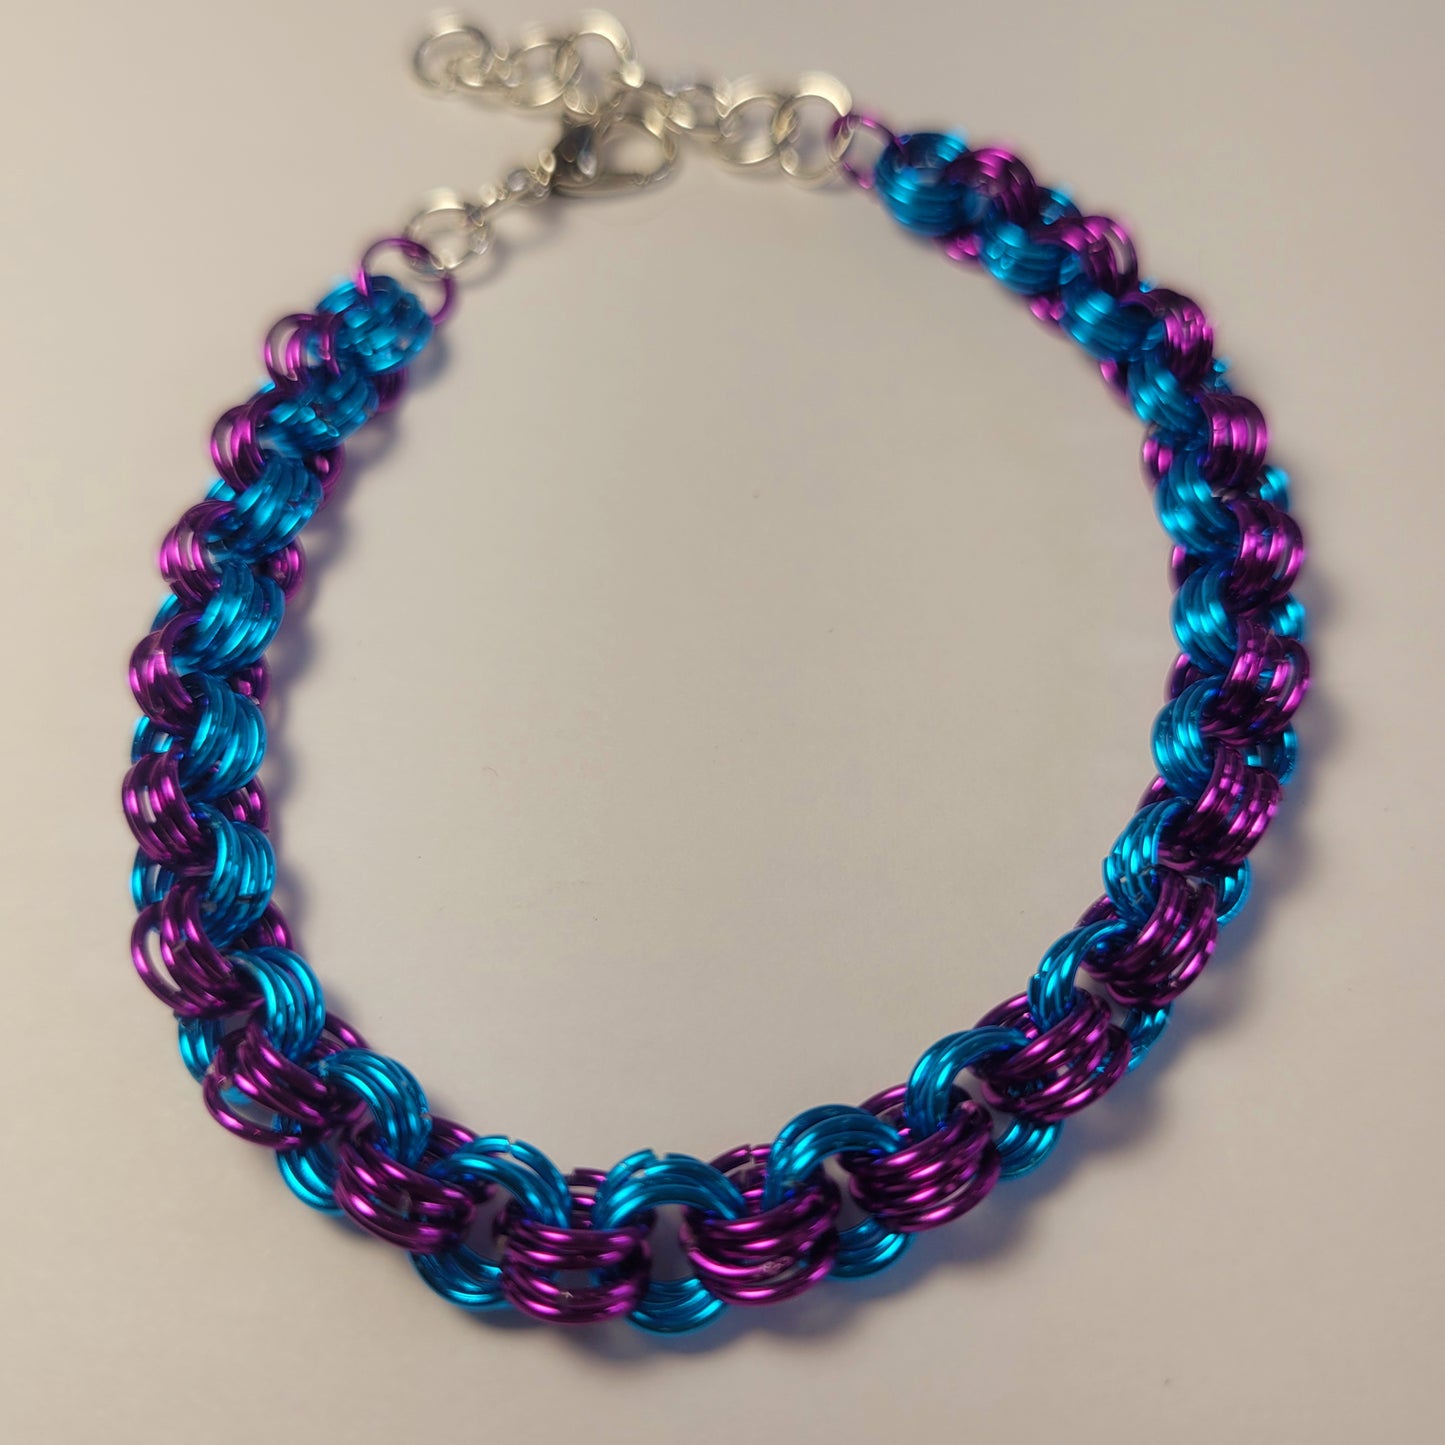 Bracelet, blue and purple chainmail